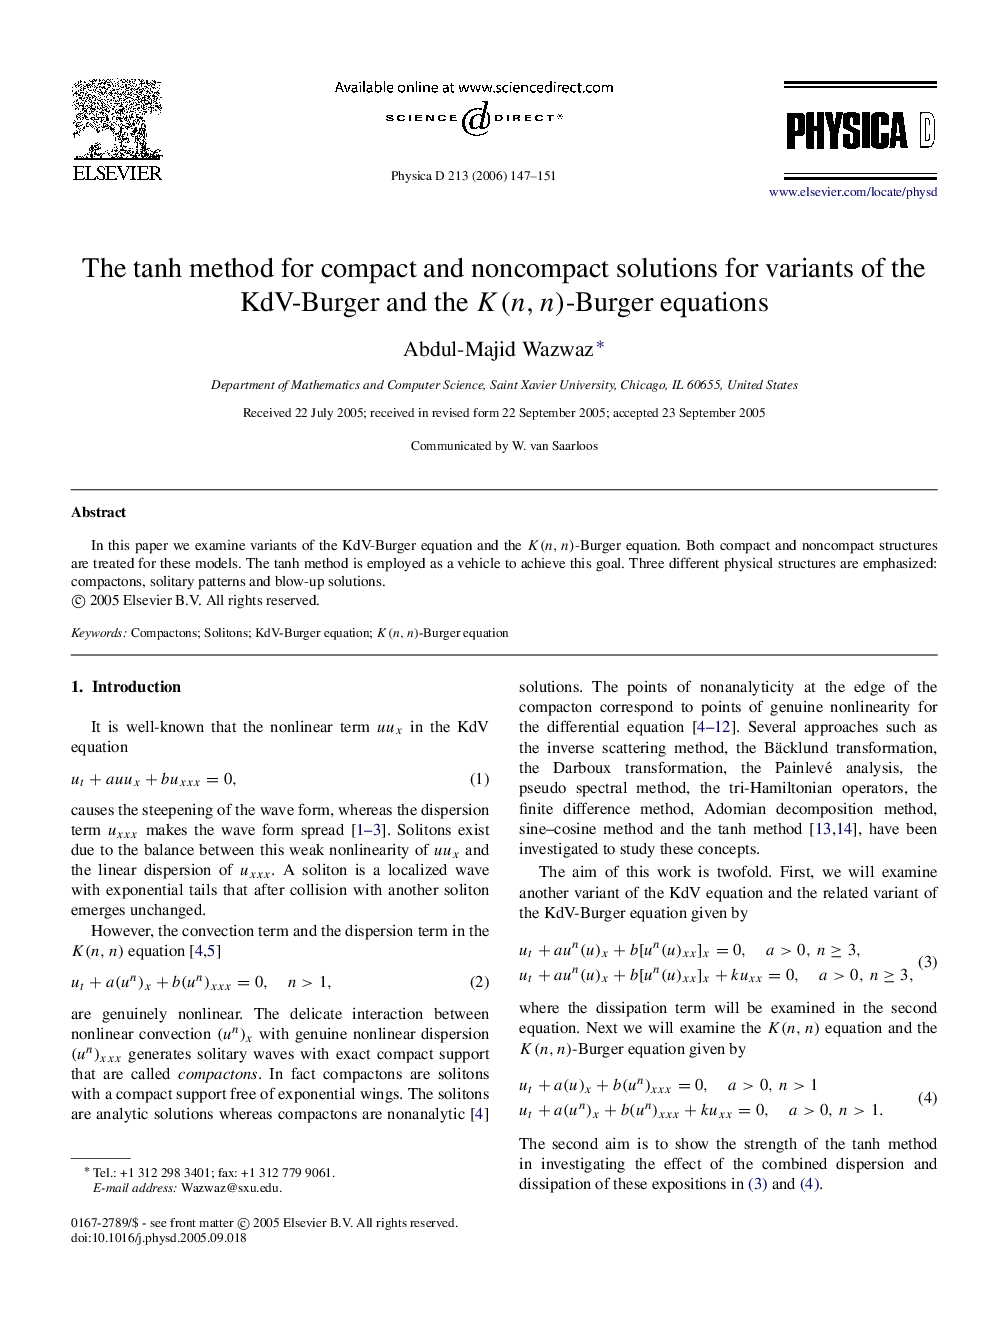 The tanh method for compact and noncompact solutions for variants of the KdV-Burger and the K(n,n)-Burger equations